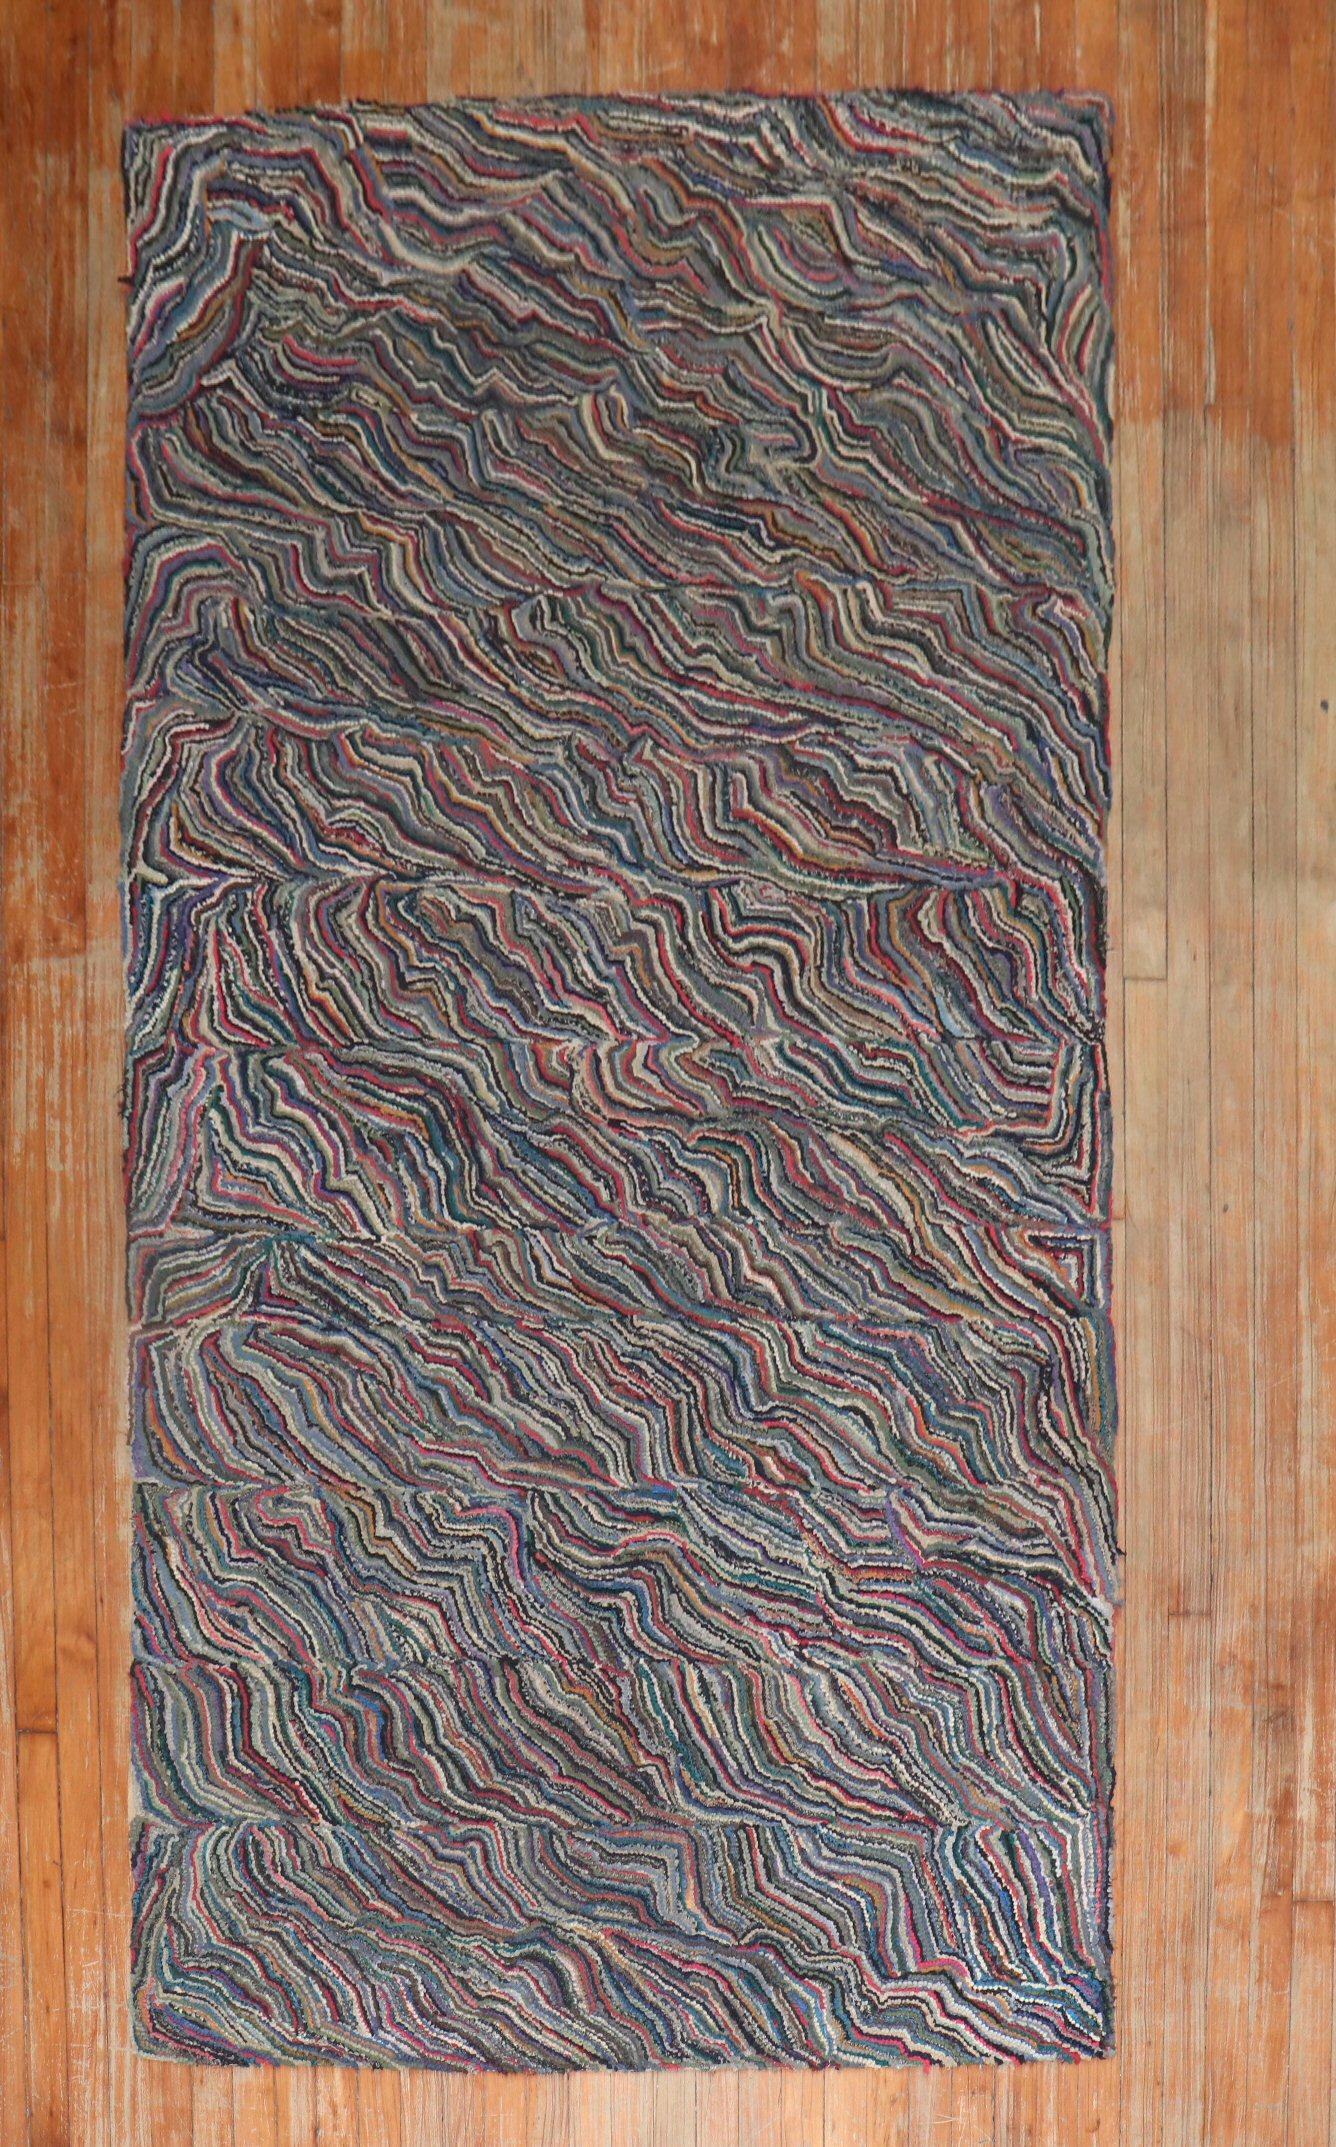 A handmade one-of-a-kind American Hooked rug from the 3rd quarter of the 20th century w

Measures: 4'4'' x 8'6''.